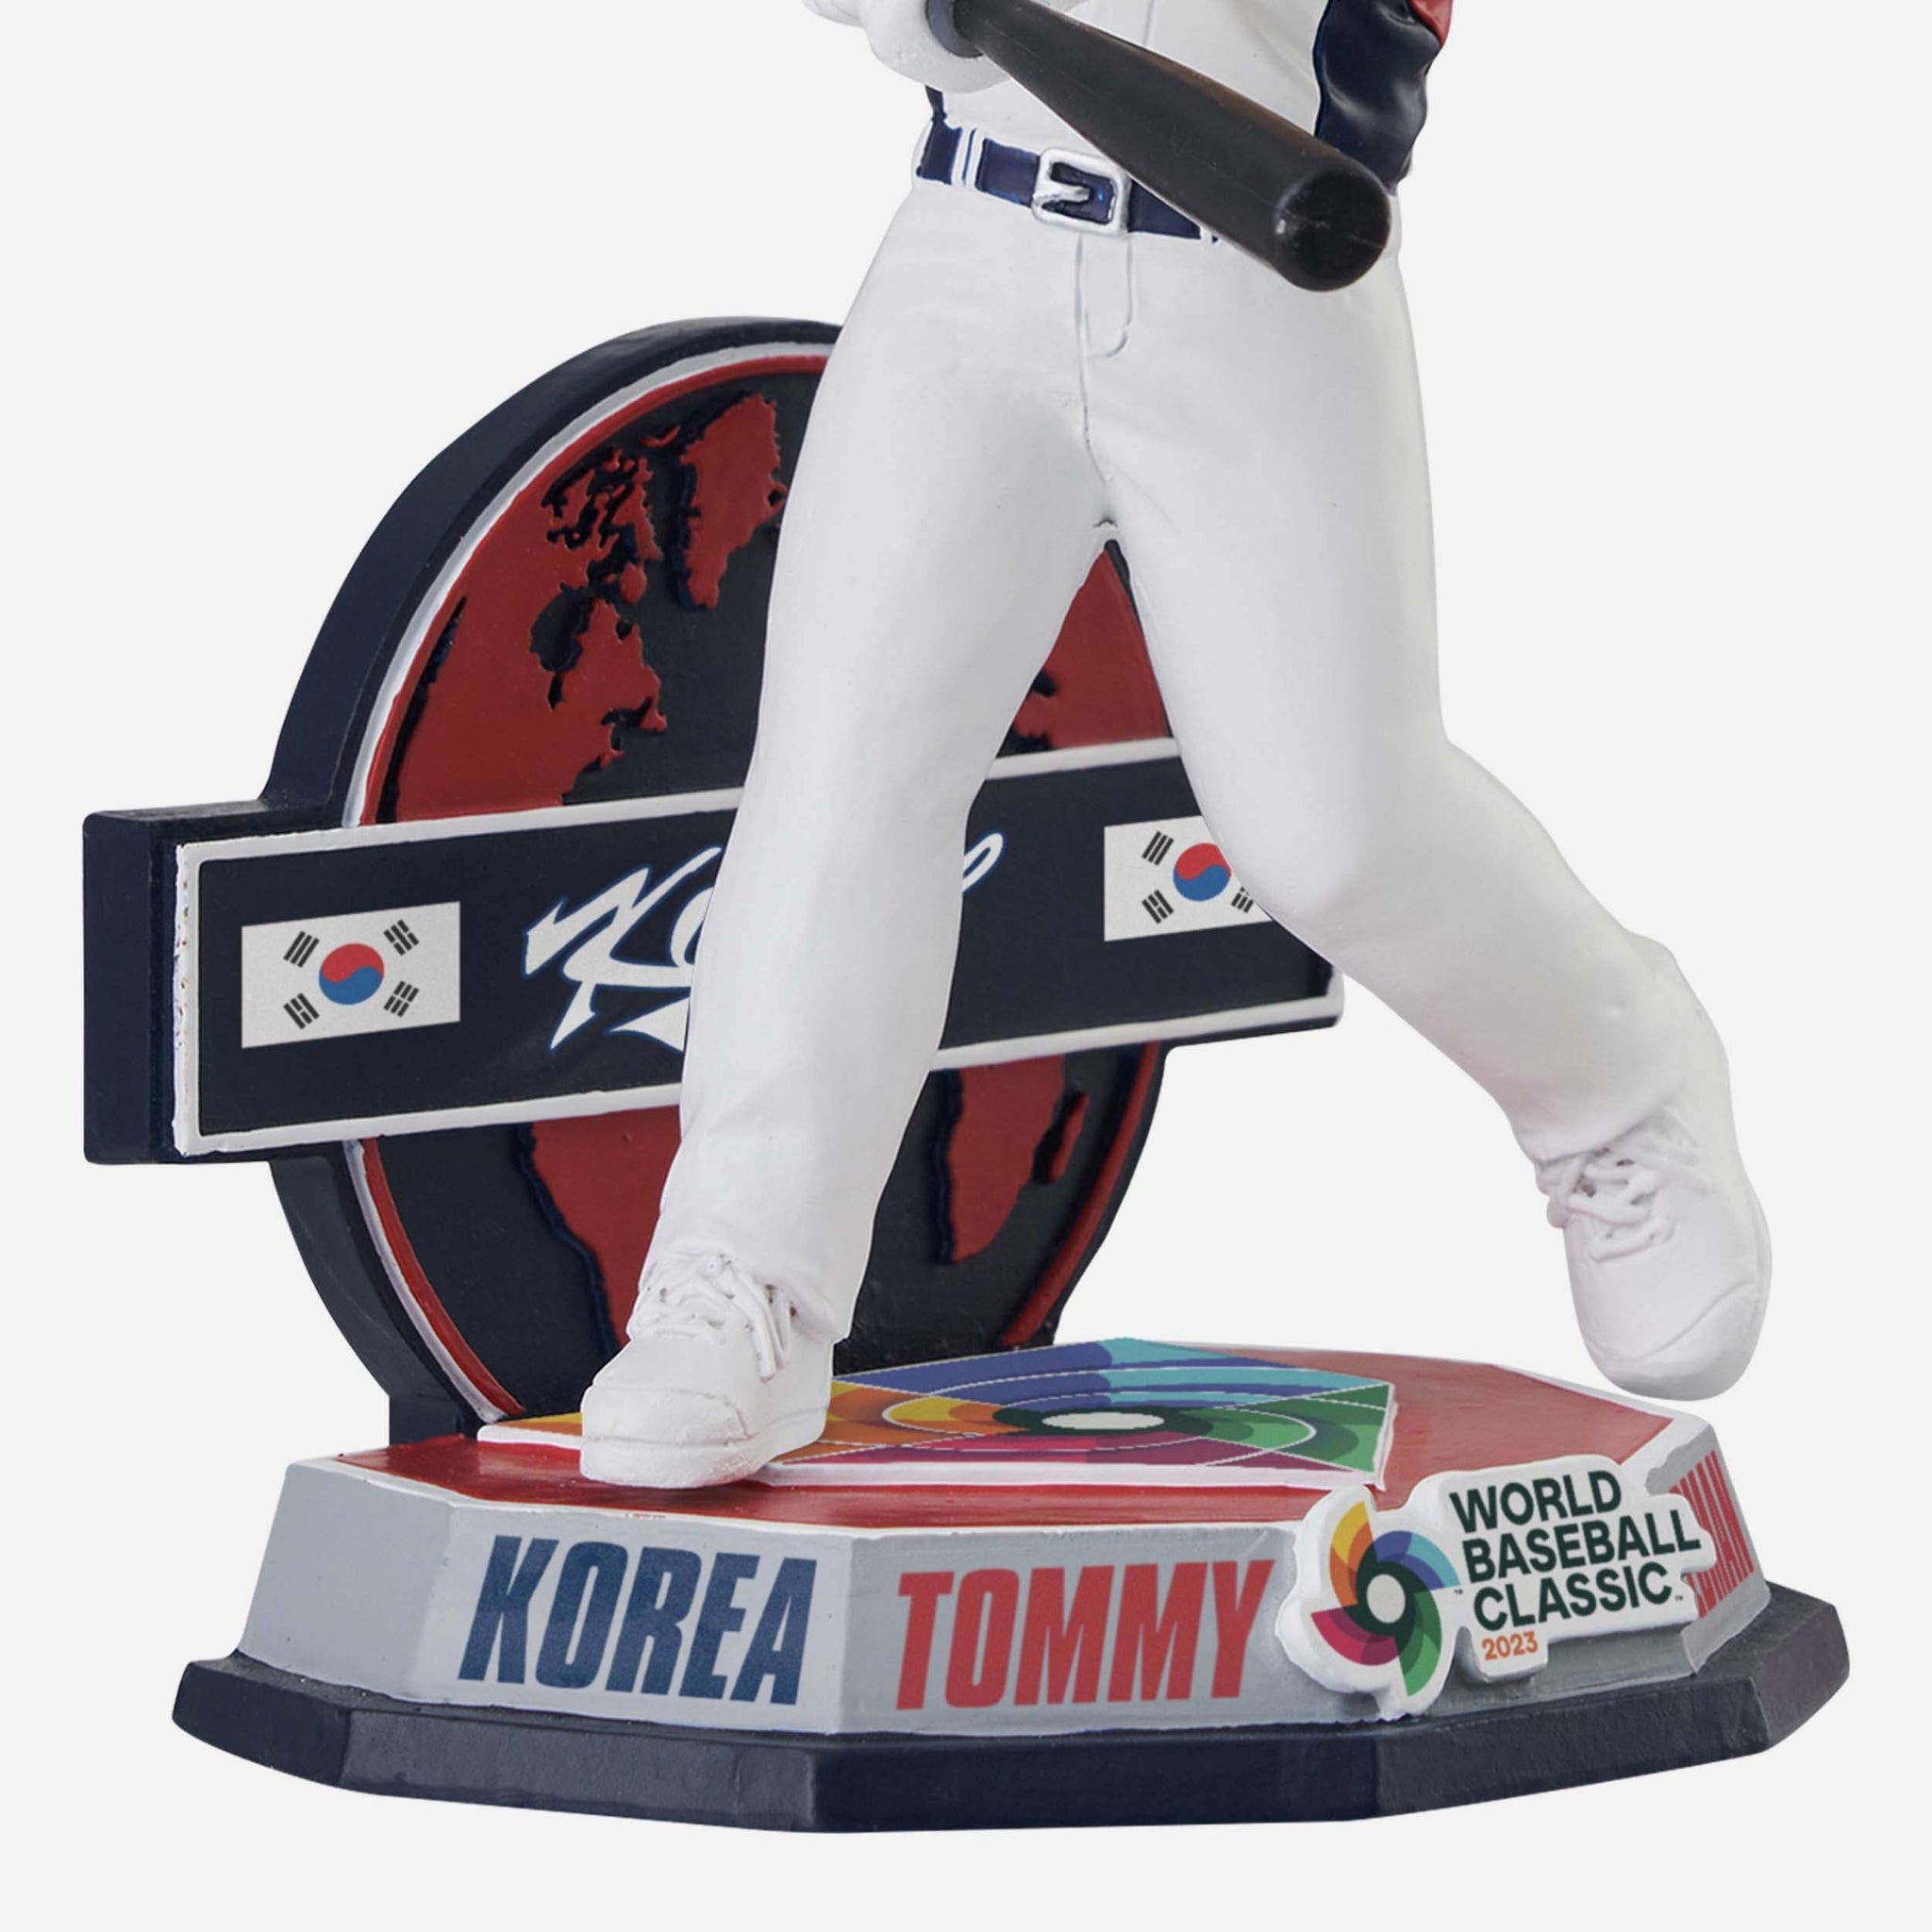 Report: Tommy Edman expected to play for Korea in World Baseball Classic